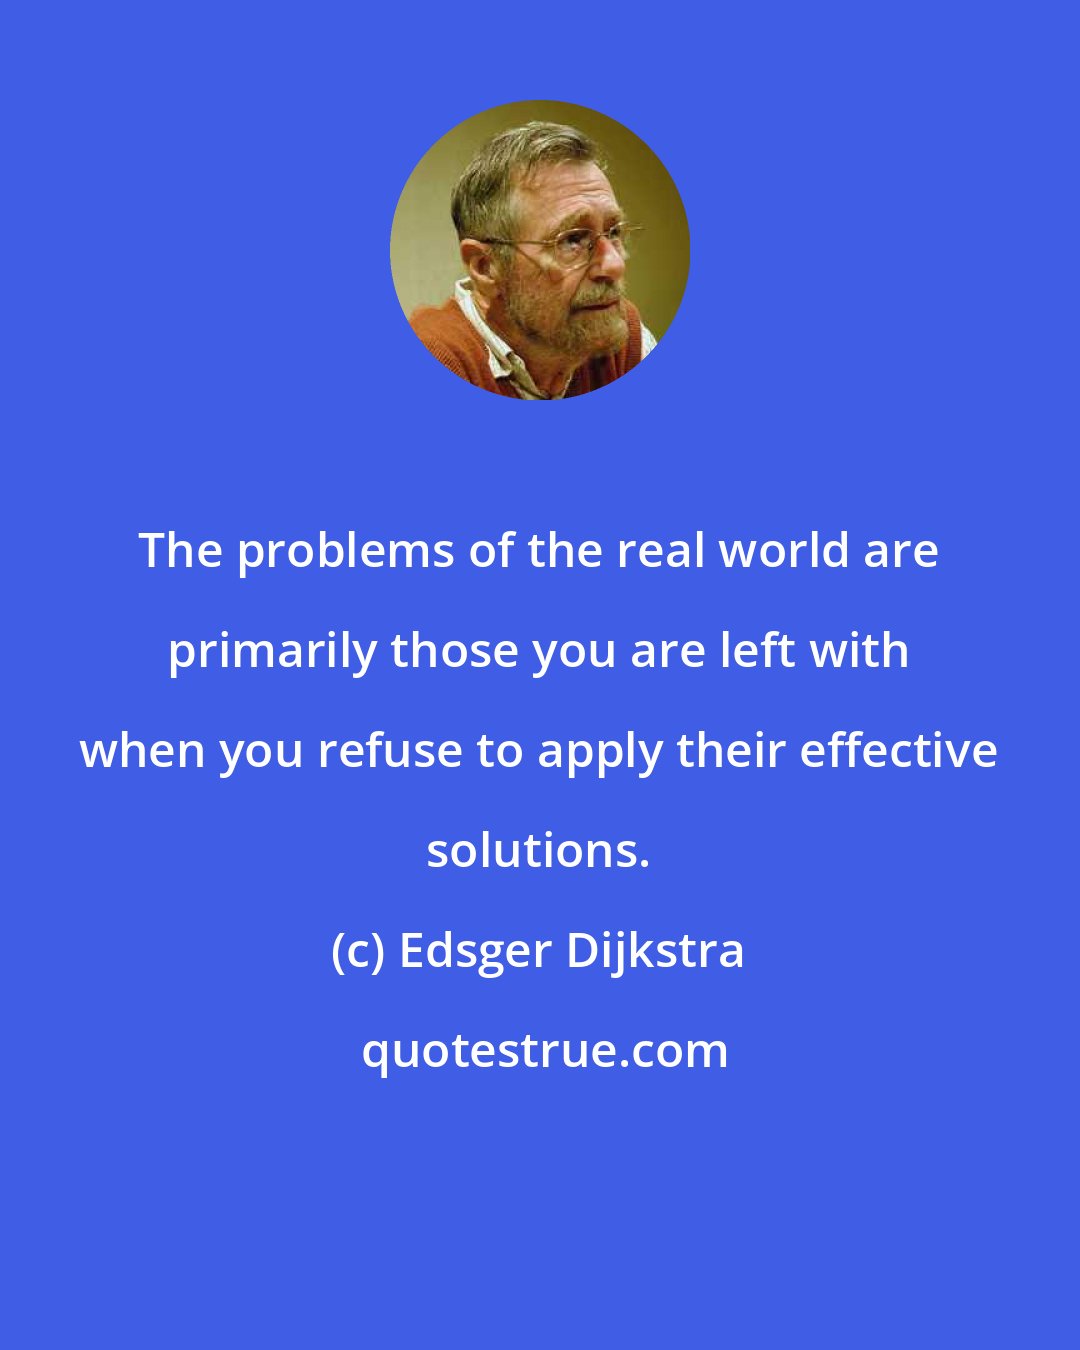 Edsger Dijkstra: The problems of the real world are primarily those you are left with when you refuse to apply their effective solutions.